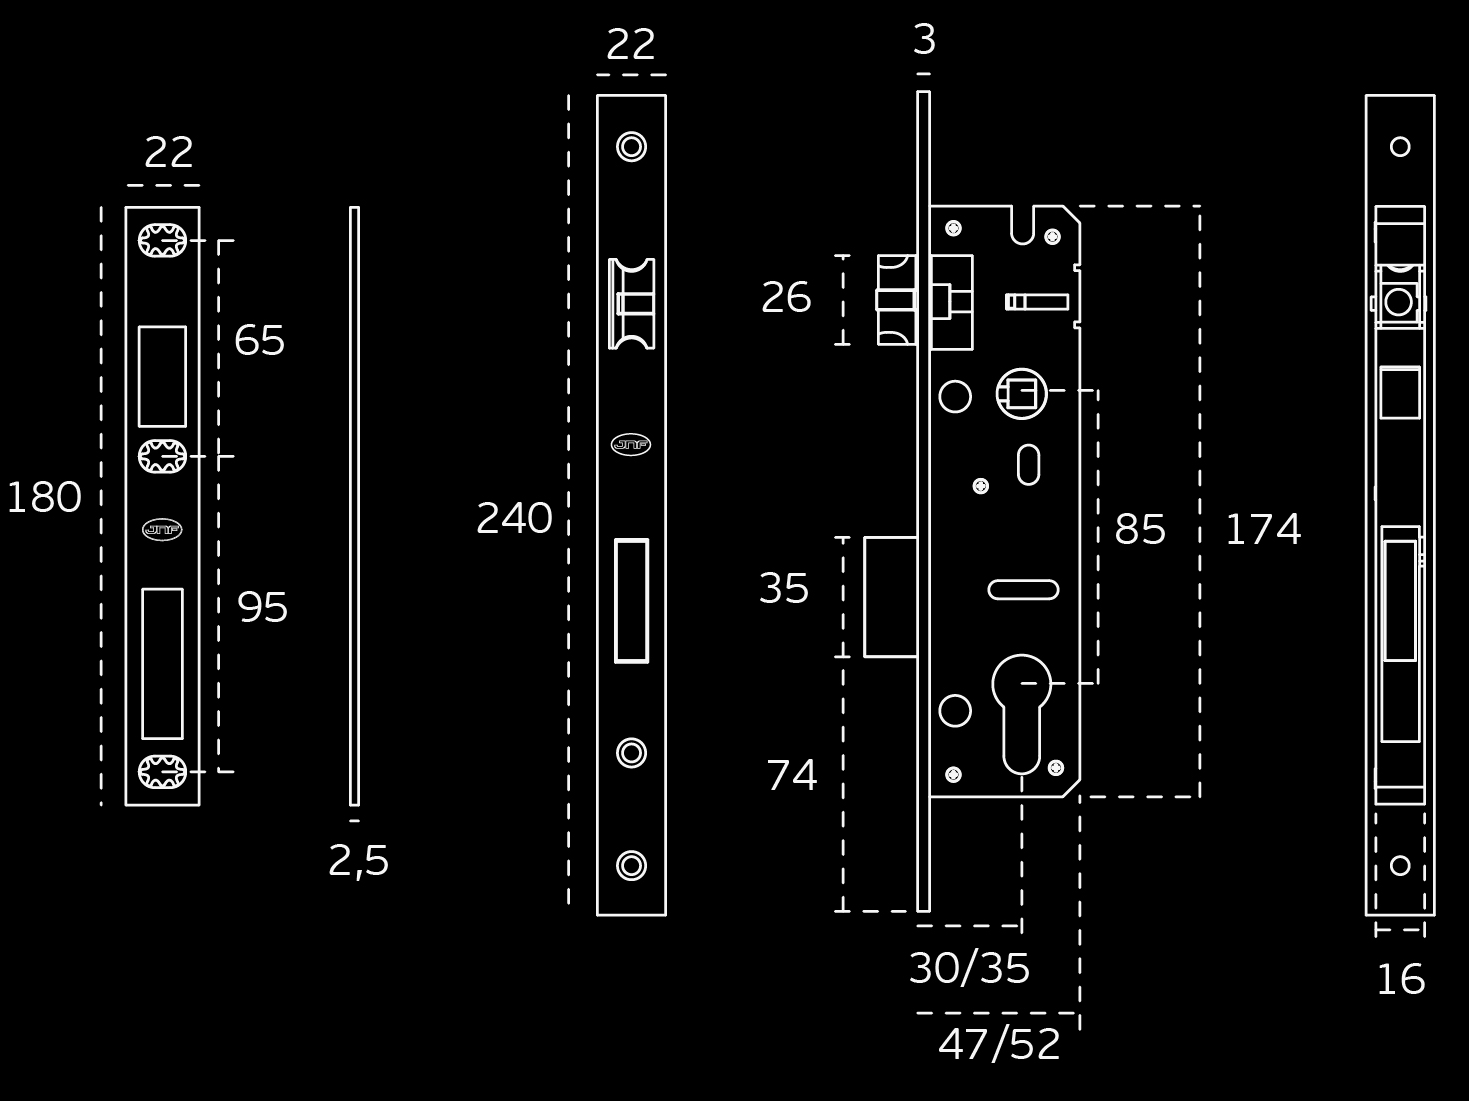 White specification line drawings of the Brushed Chrome Narrow Euro Lock 35mm by Architectural Choice on a black background.